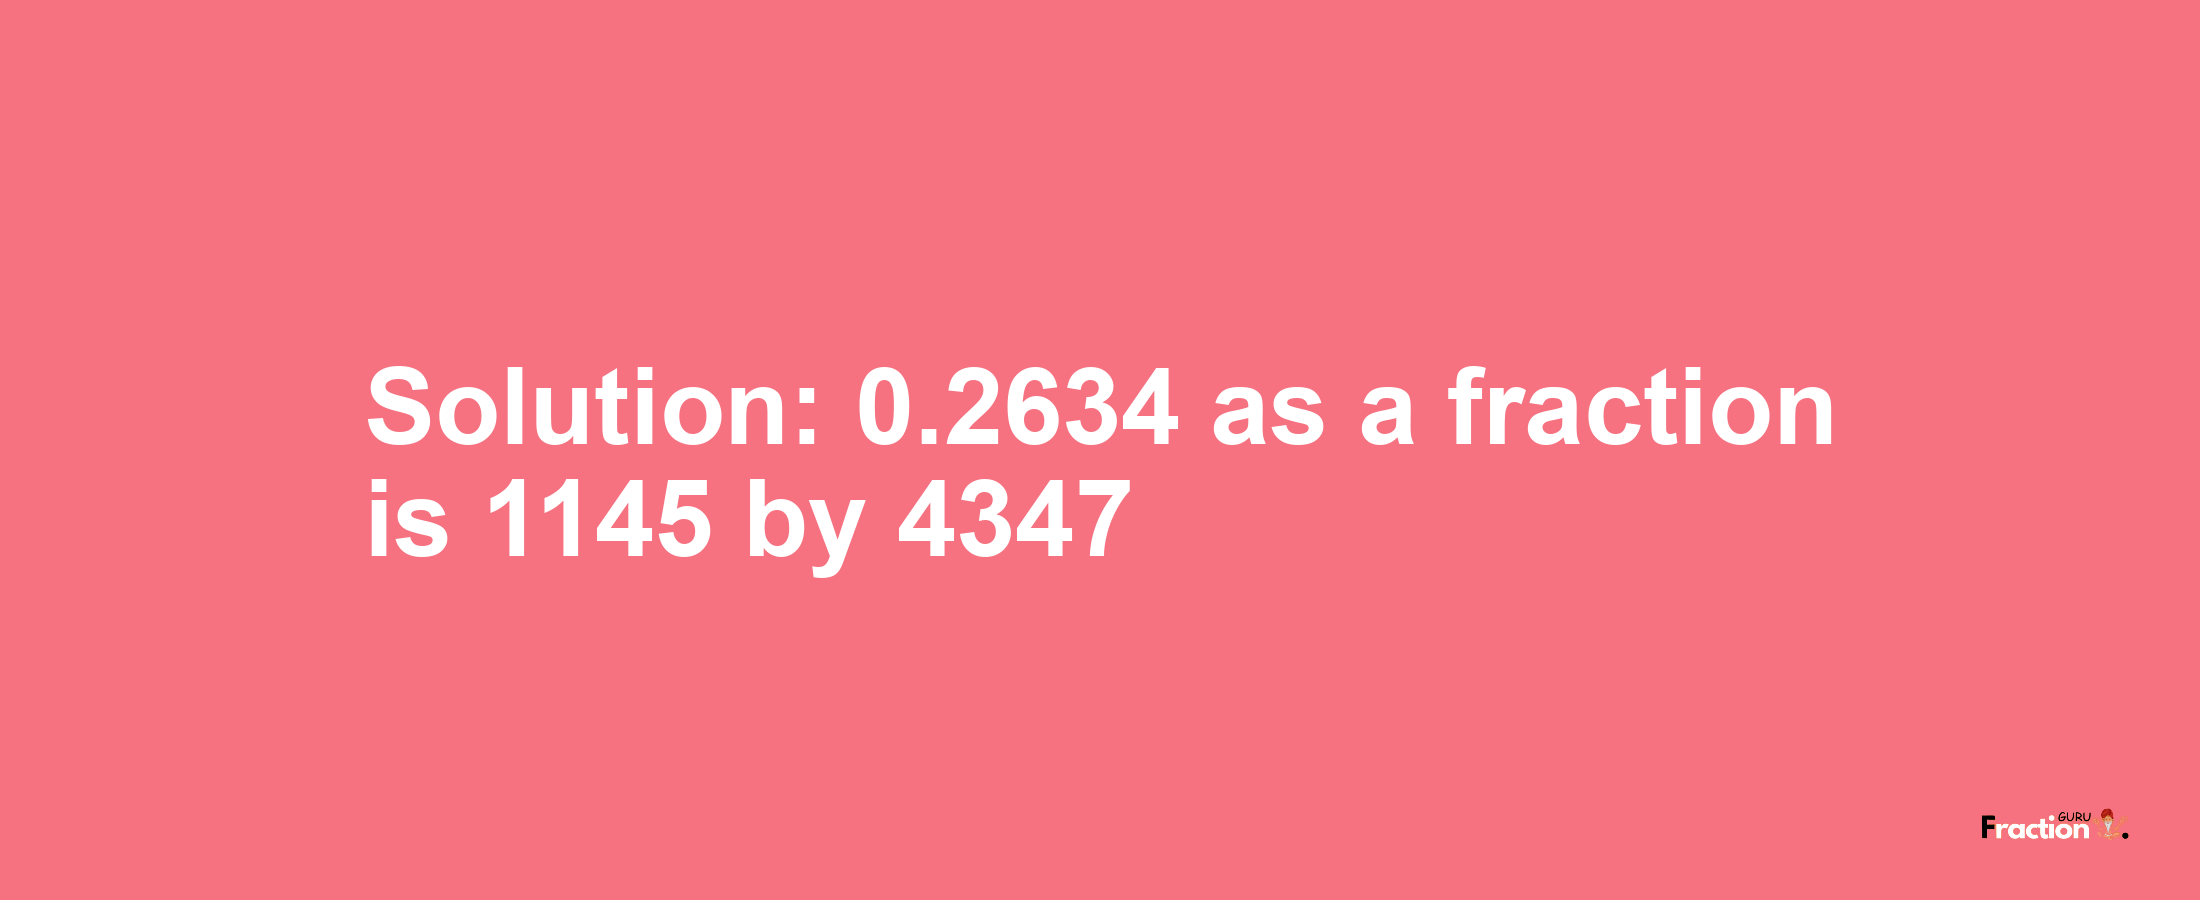 Solution:0.2634 as a fraction is 1145/4347